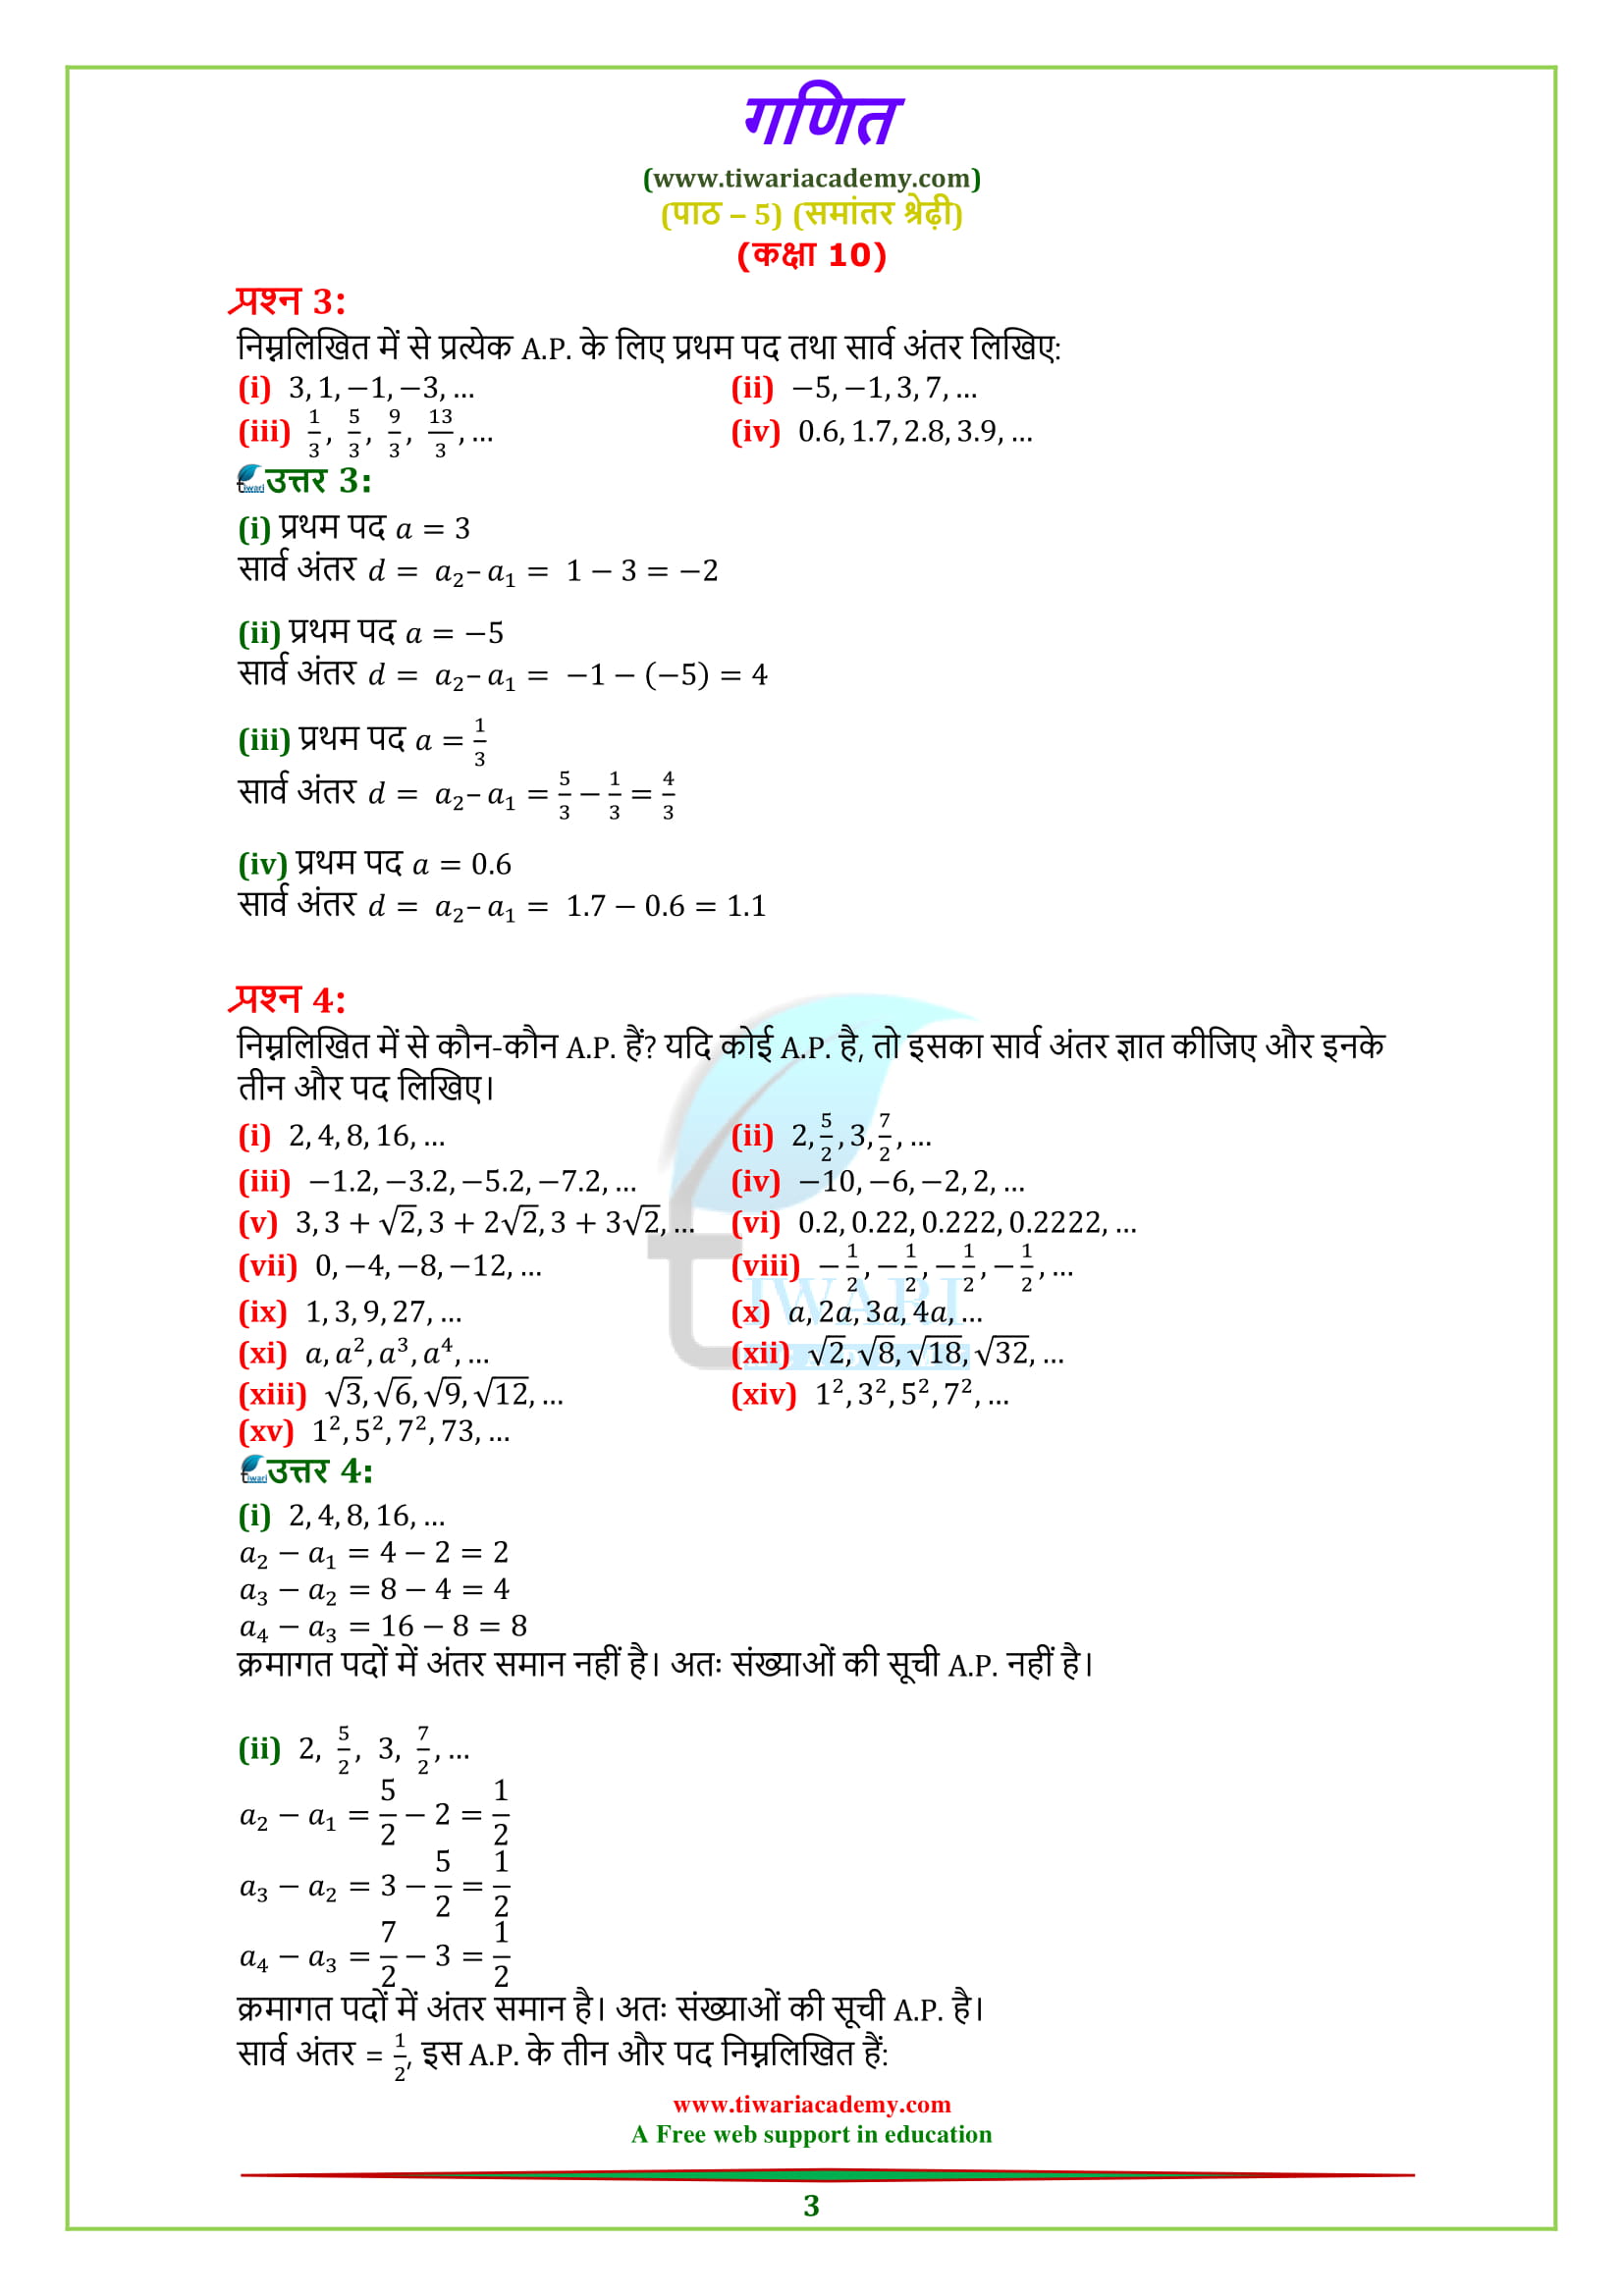 Class 10 Maths Chapter 5 Exercise 5.1 Solutions